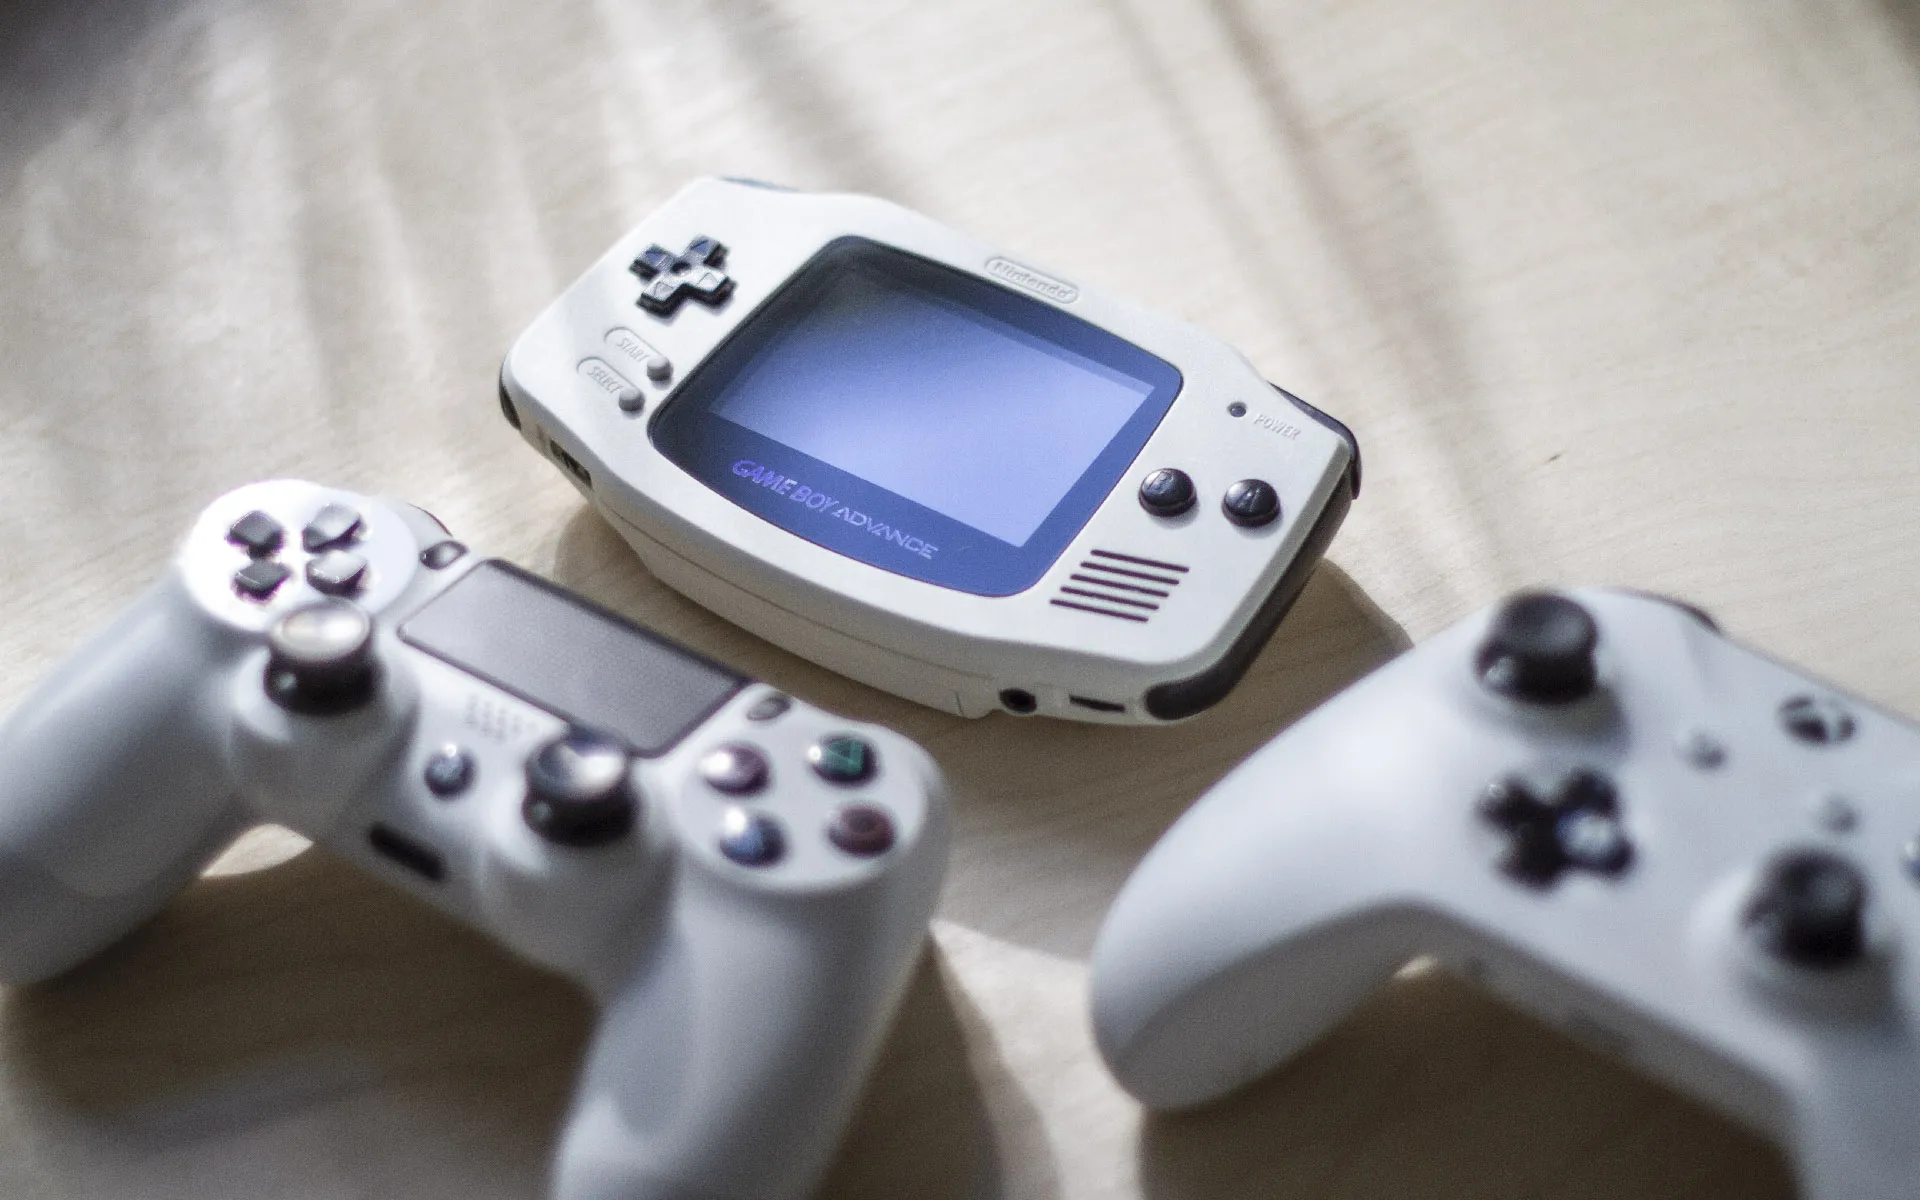 White Gameboy Advance next to a white Xbox one and PS4 controllers.